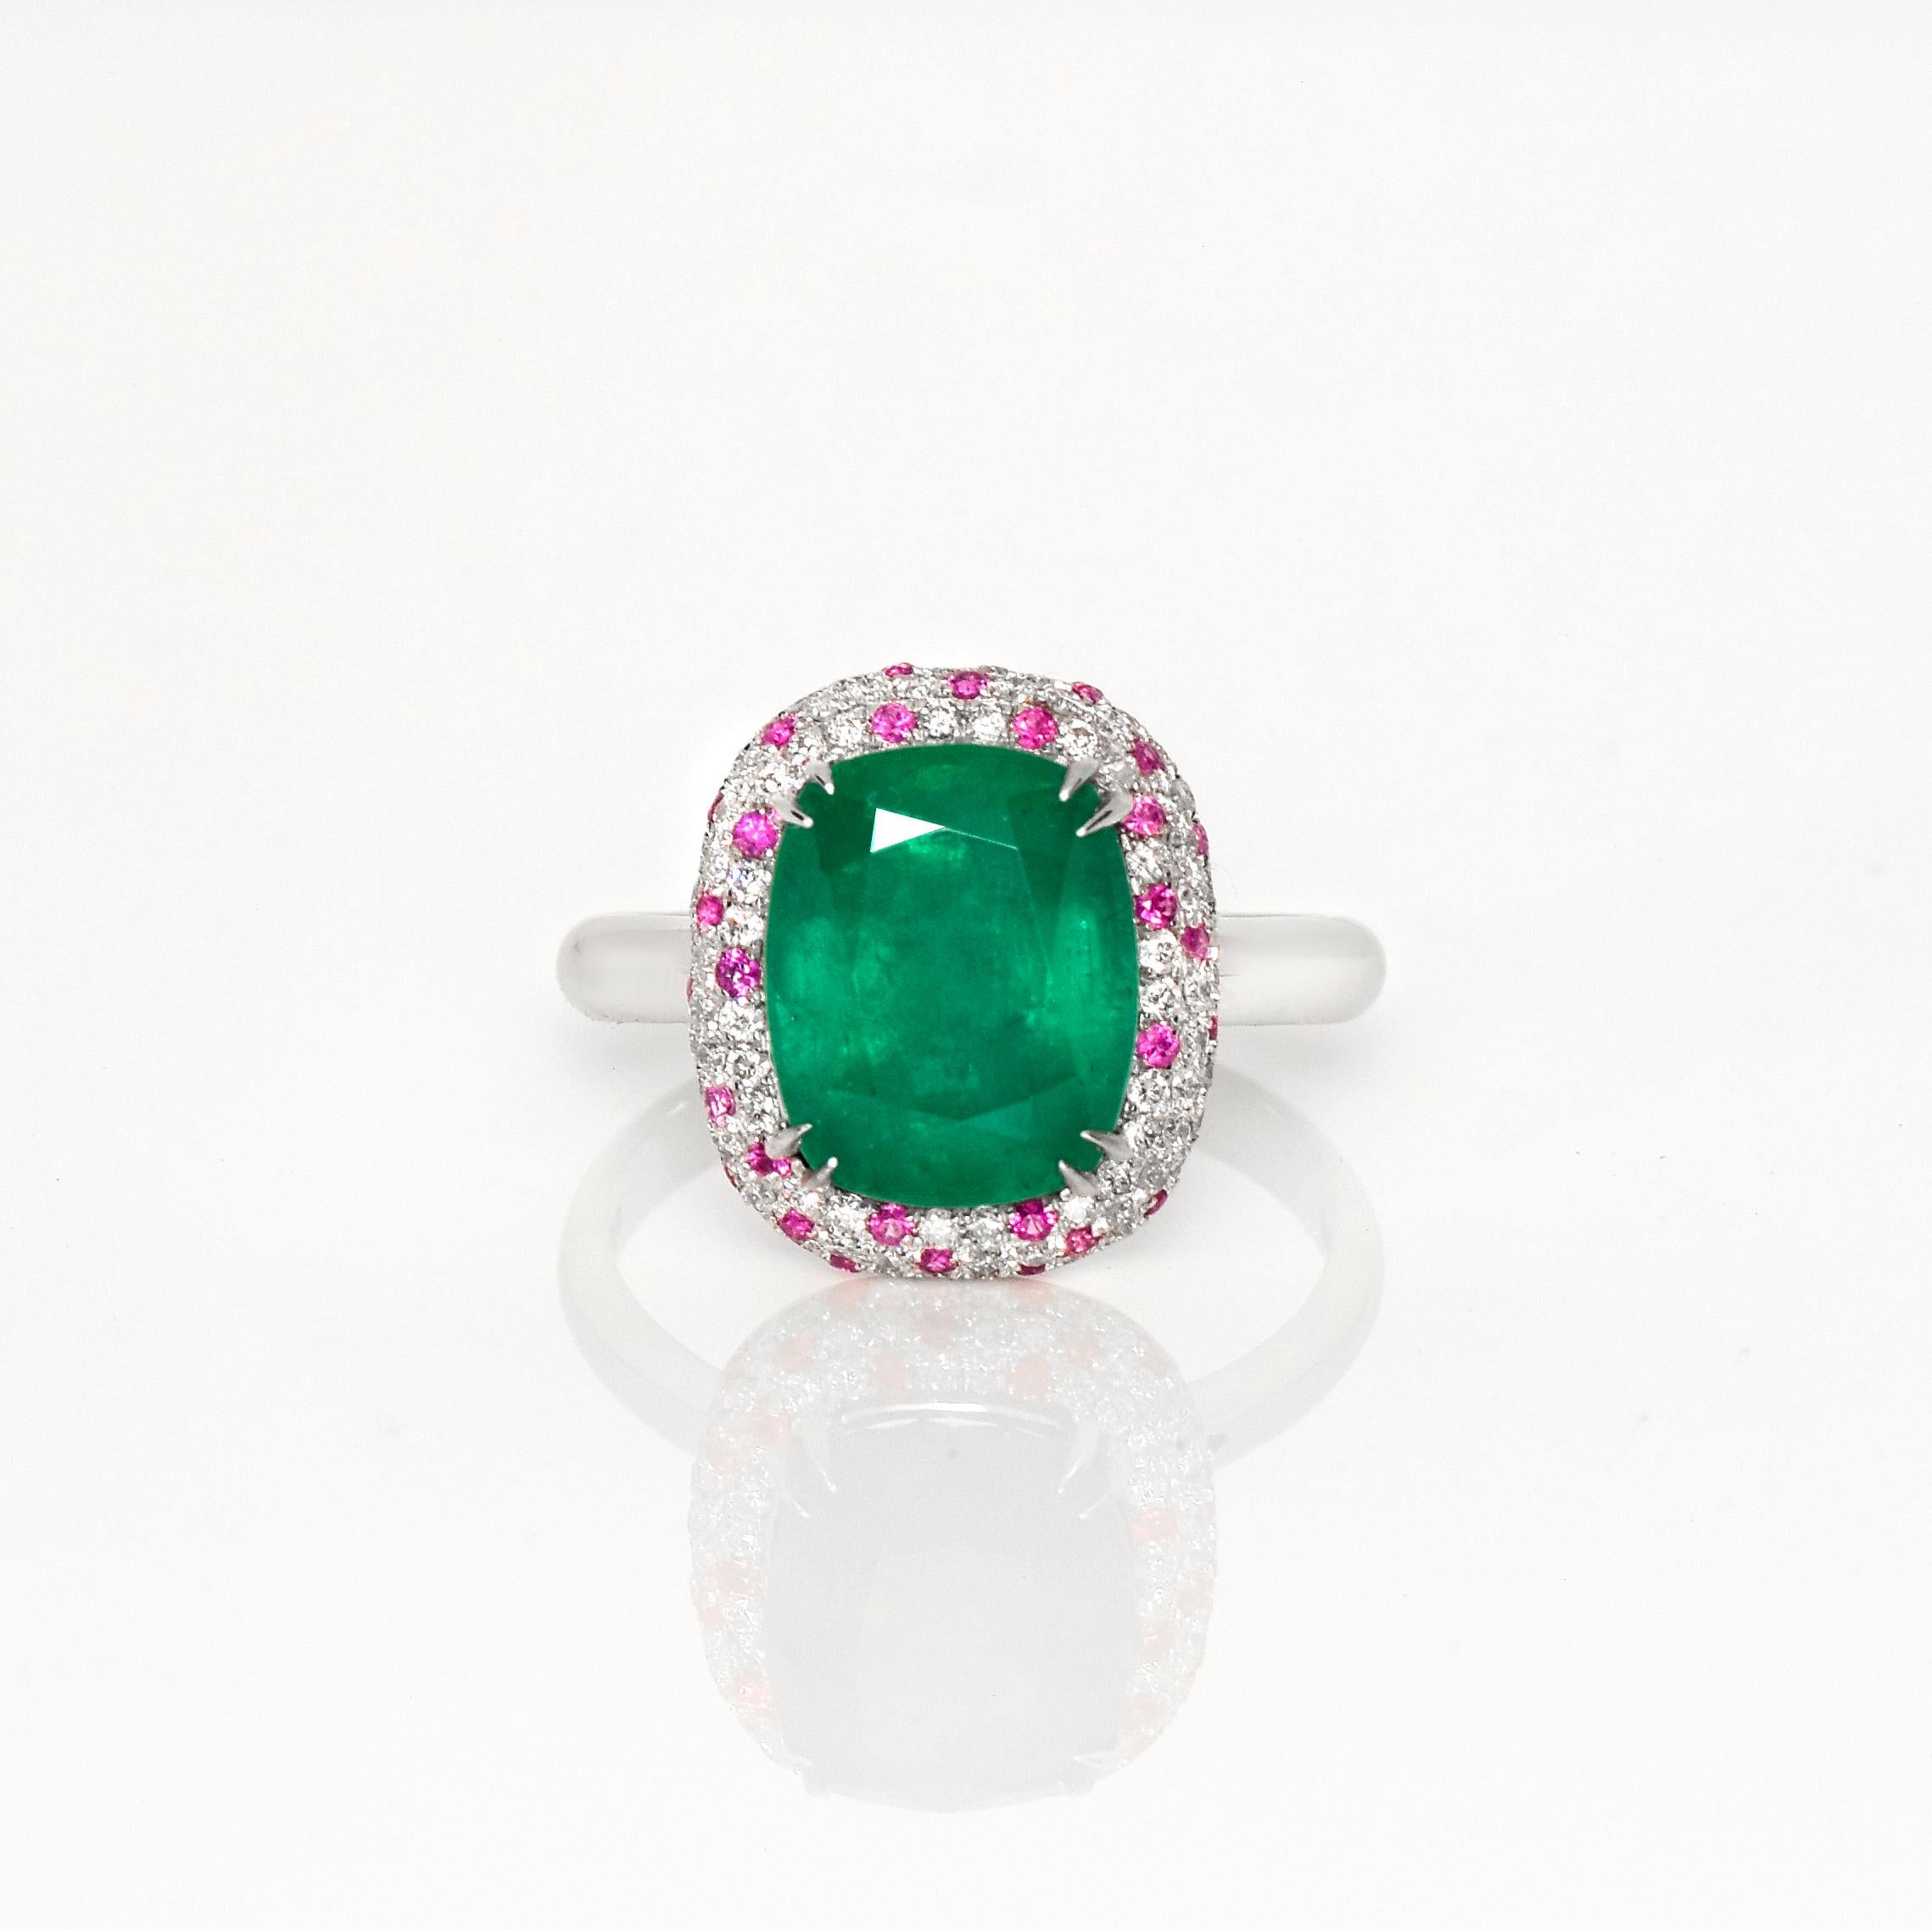 * IGI 14k 3.65 ct Rarest No Oiled Emerald Engagement Ring*

This stunning piece of jewelry features a 3.65-carat rare, natural, IGI-certified emerald as the center stone. The emerald has a beautiful bluish-green hue and has not been oiled. It is set